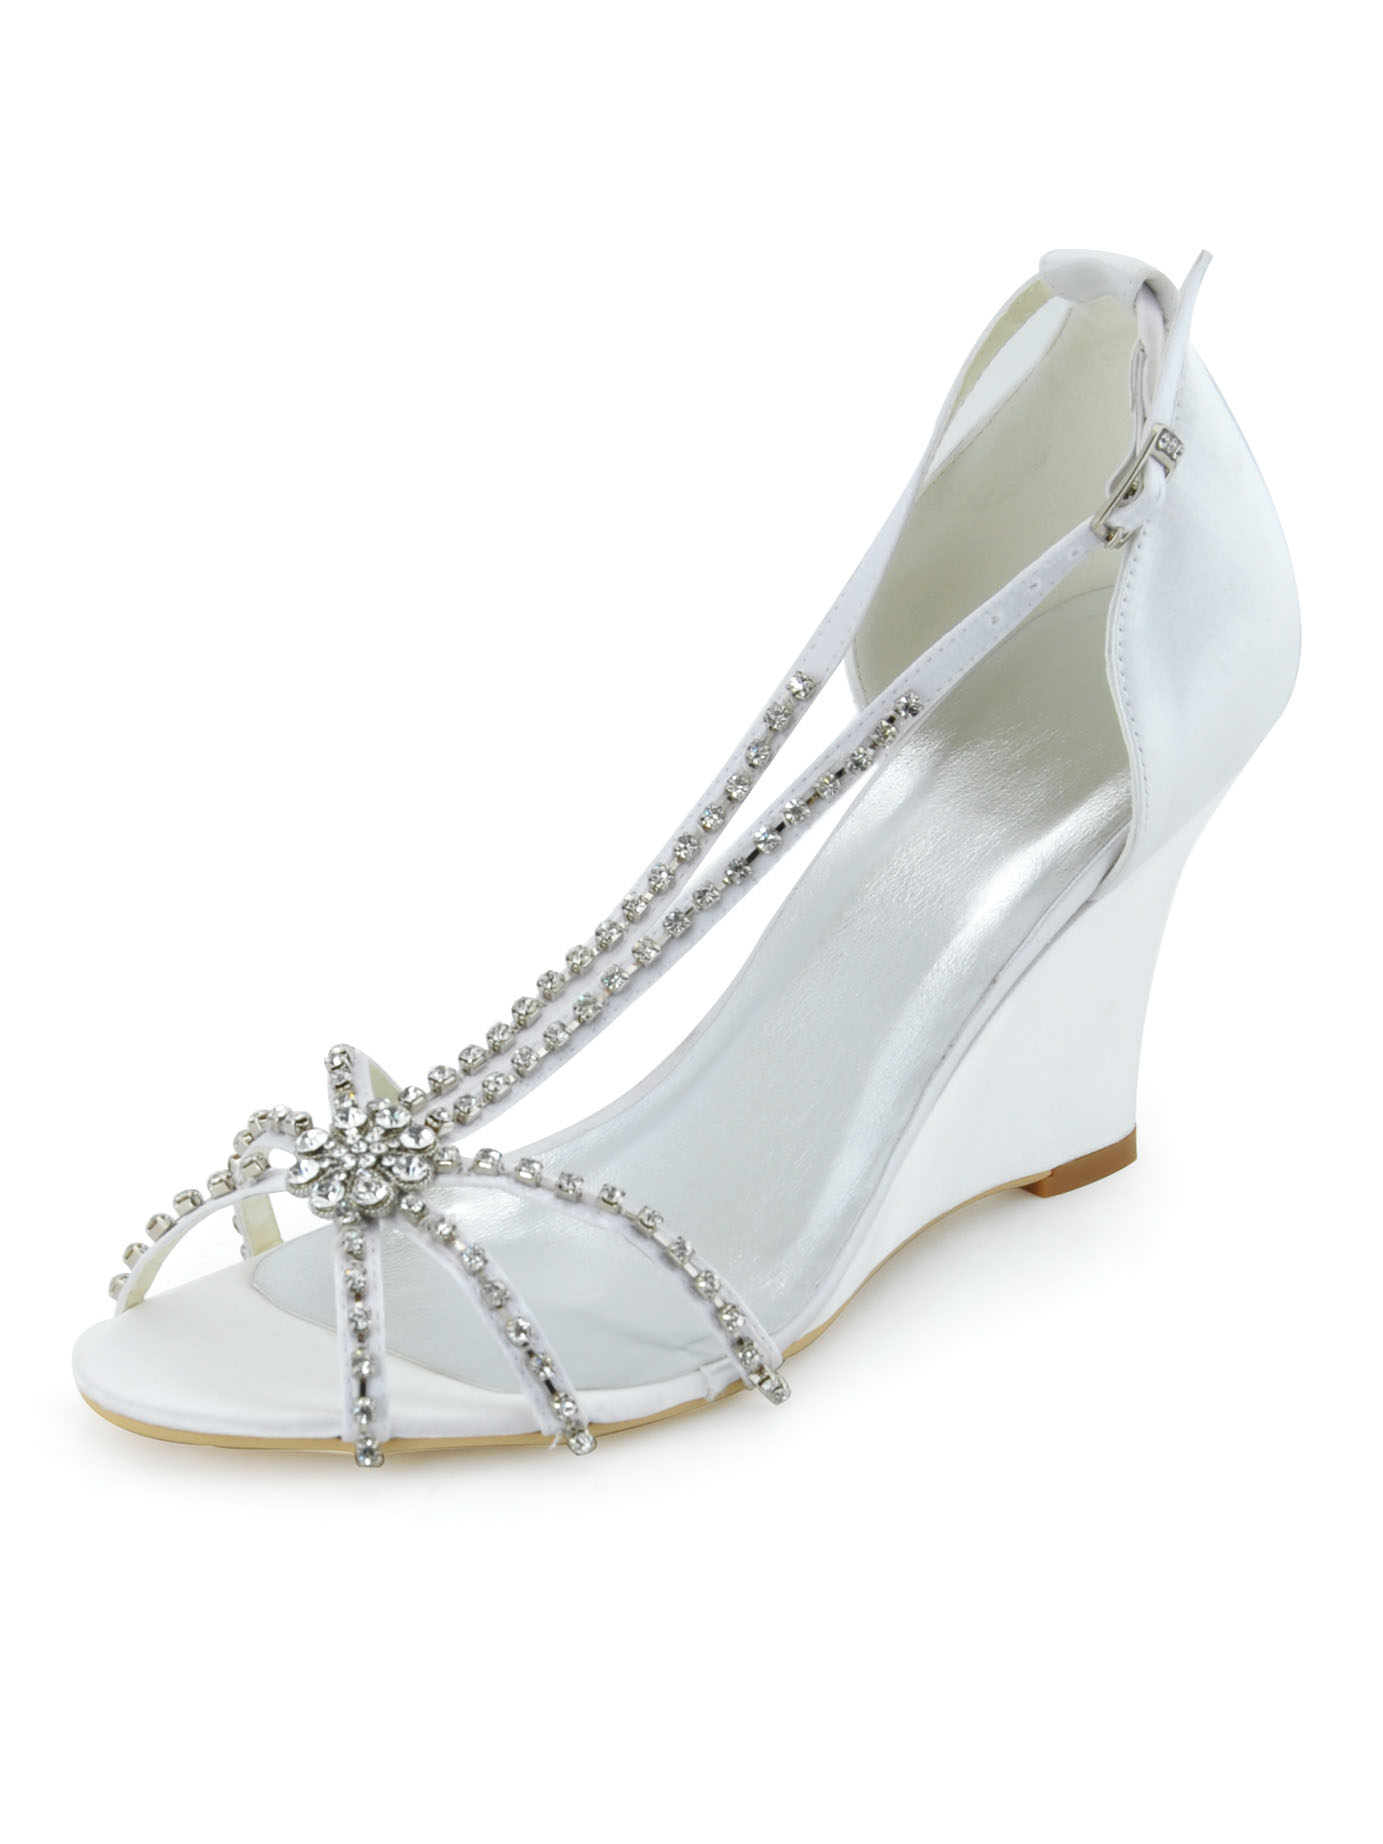 -Shoes-Wedding-Shoes-The-New-Diamond-Slope-With-High-heeled-Shoes ...